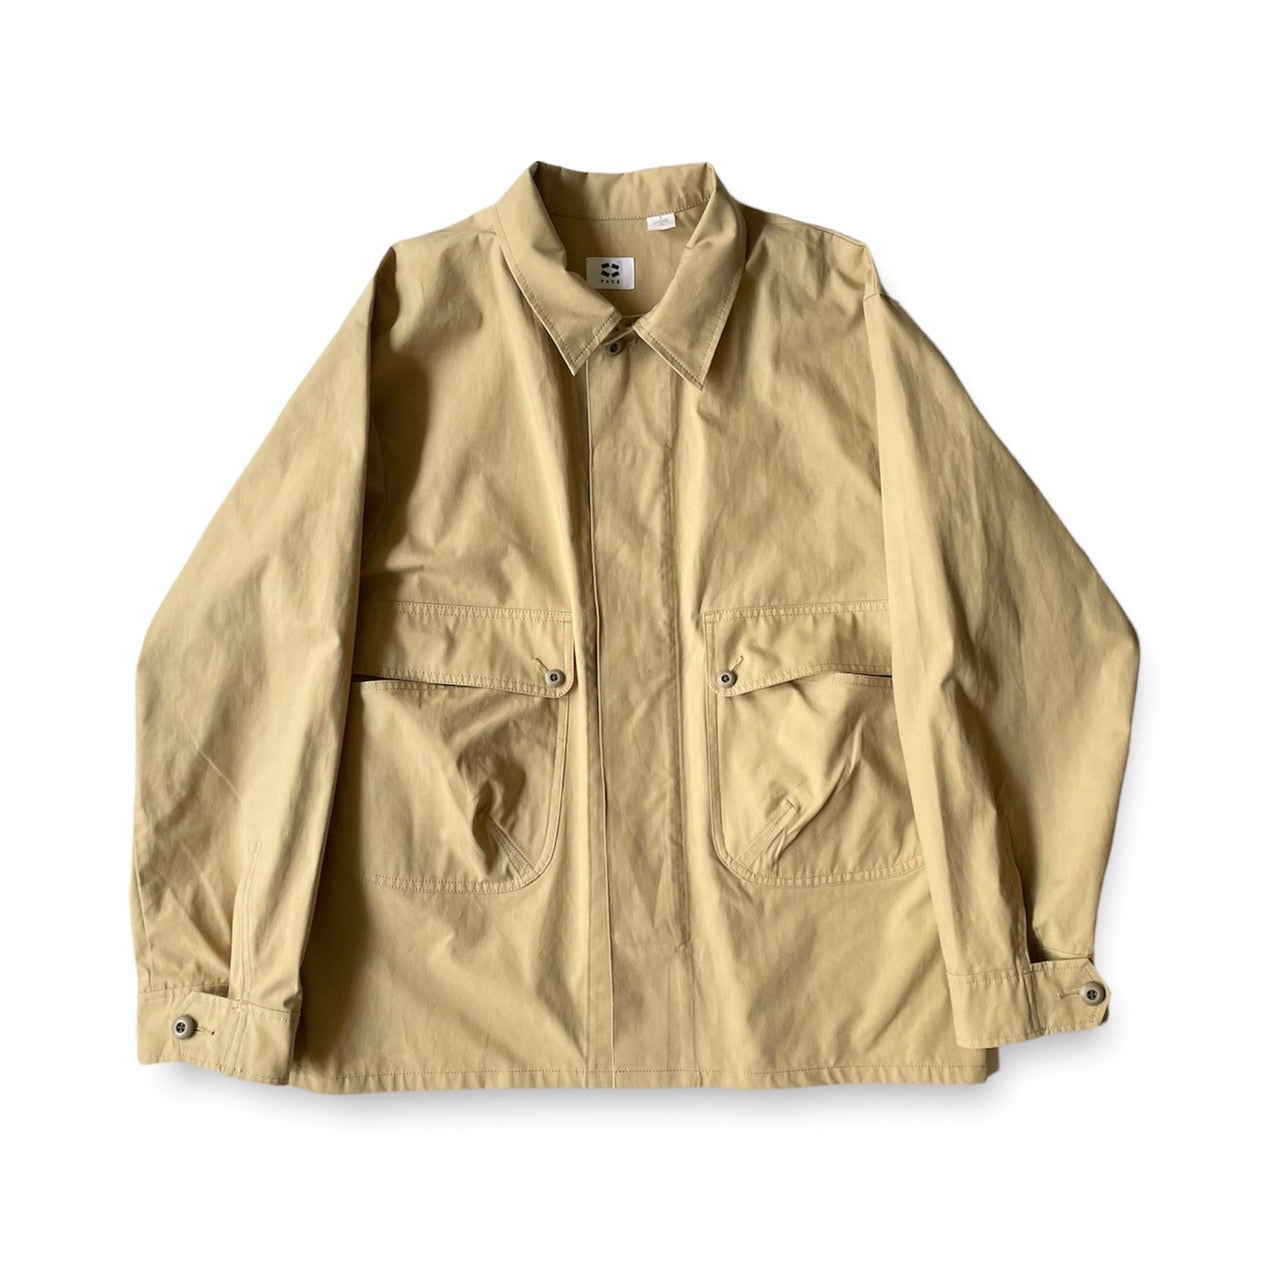 P A C S 「FROGUE SHIRTS / BEIGE」 – SISTER